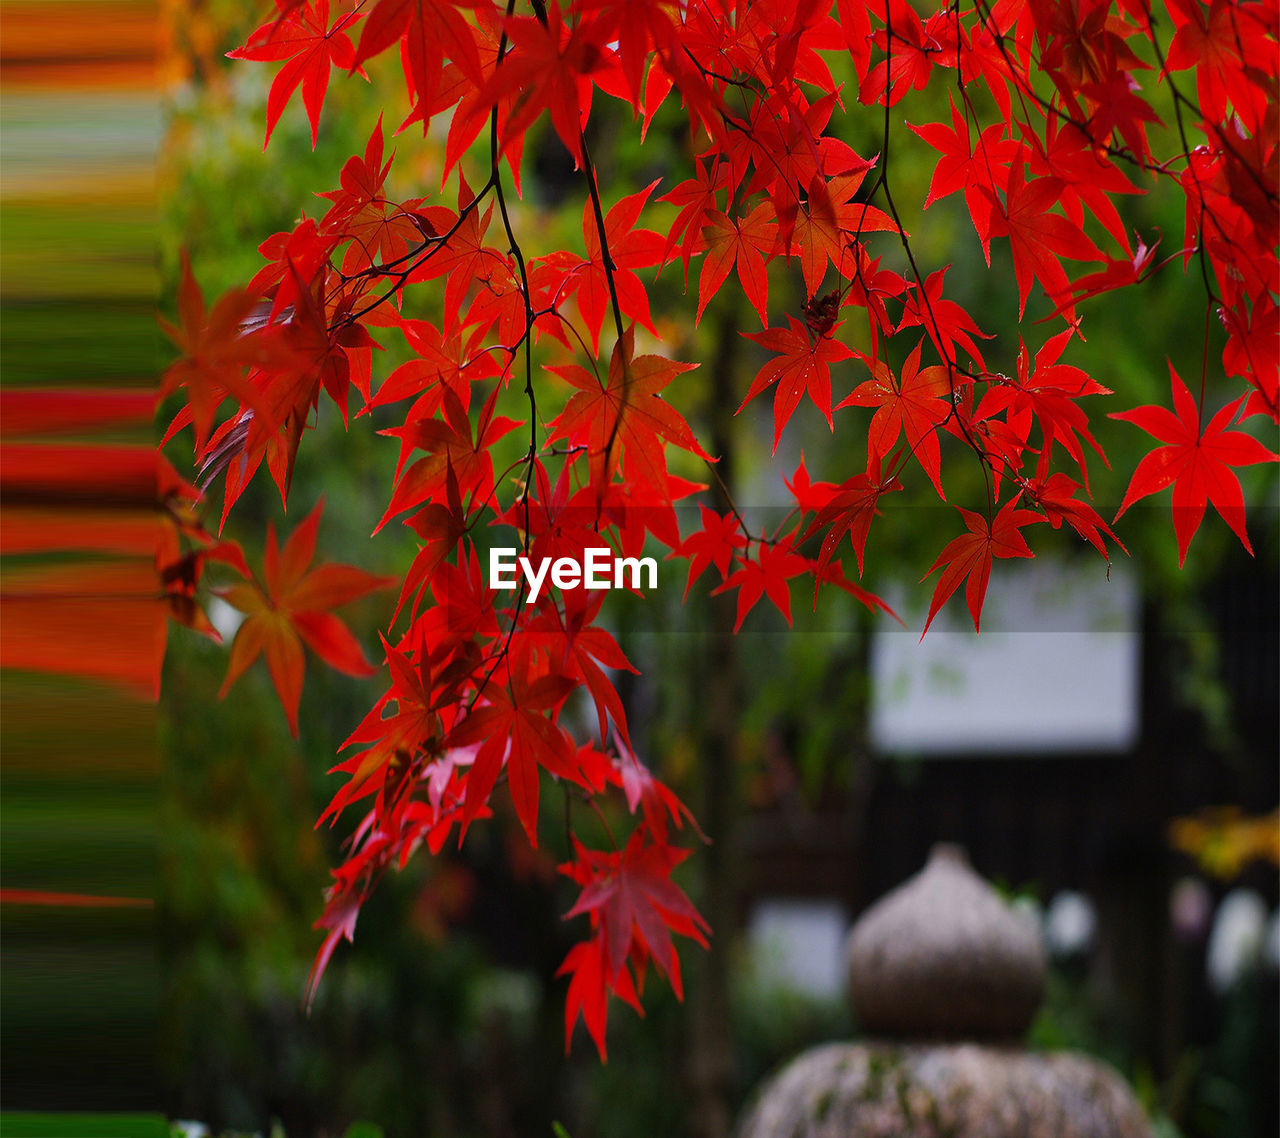 CLOSE-UP OF RED MAPLE LEAVES ON PLANT